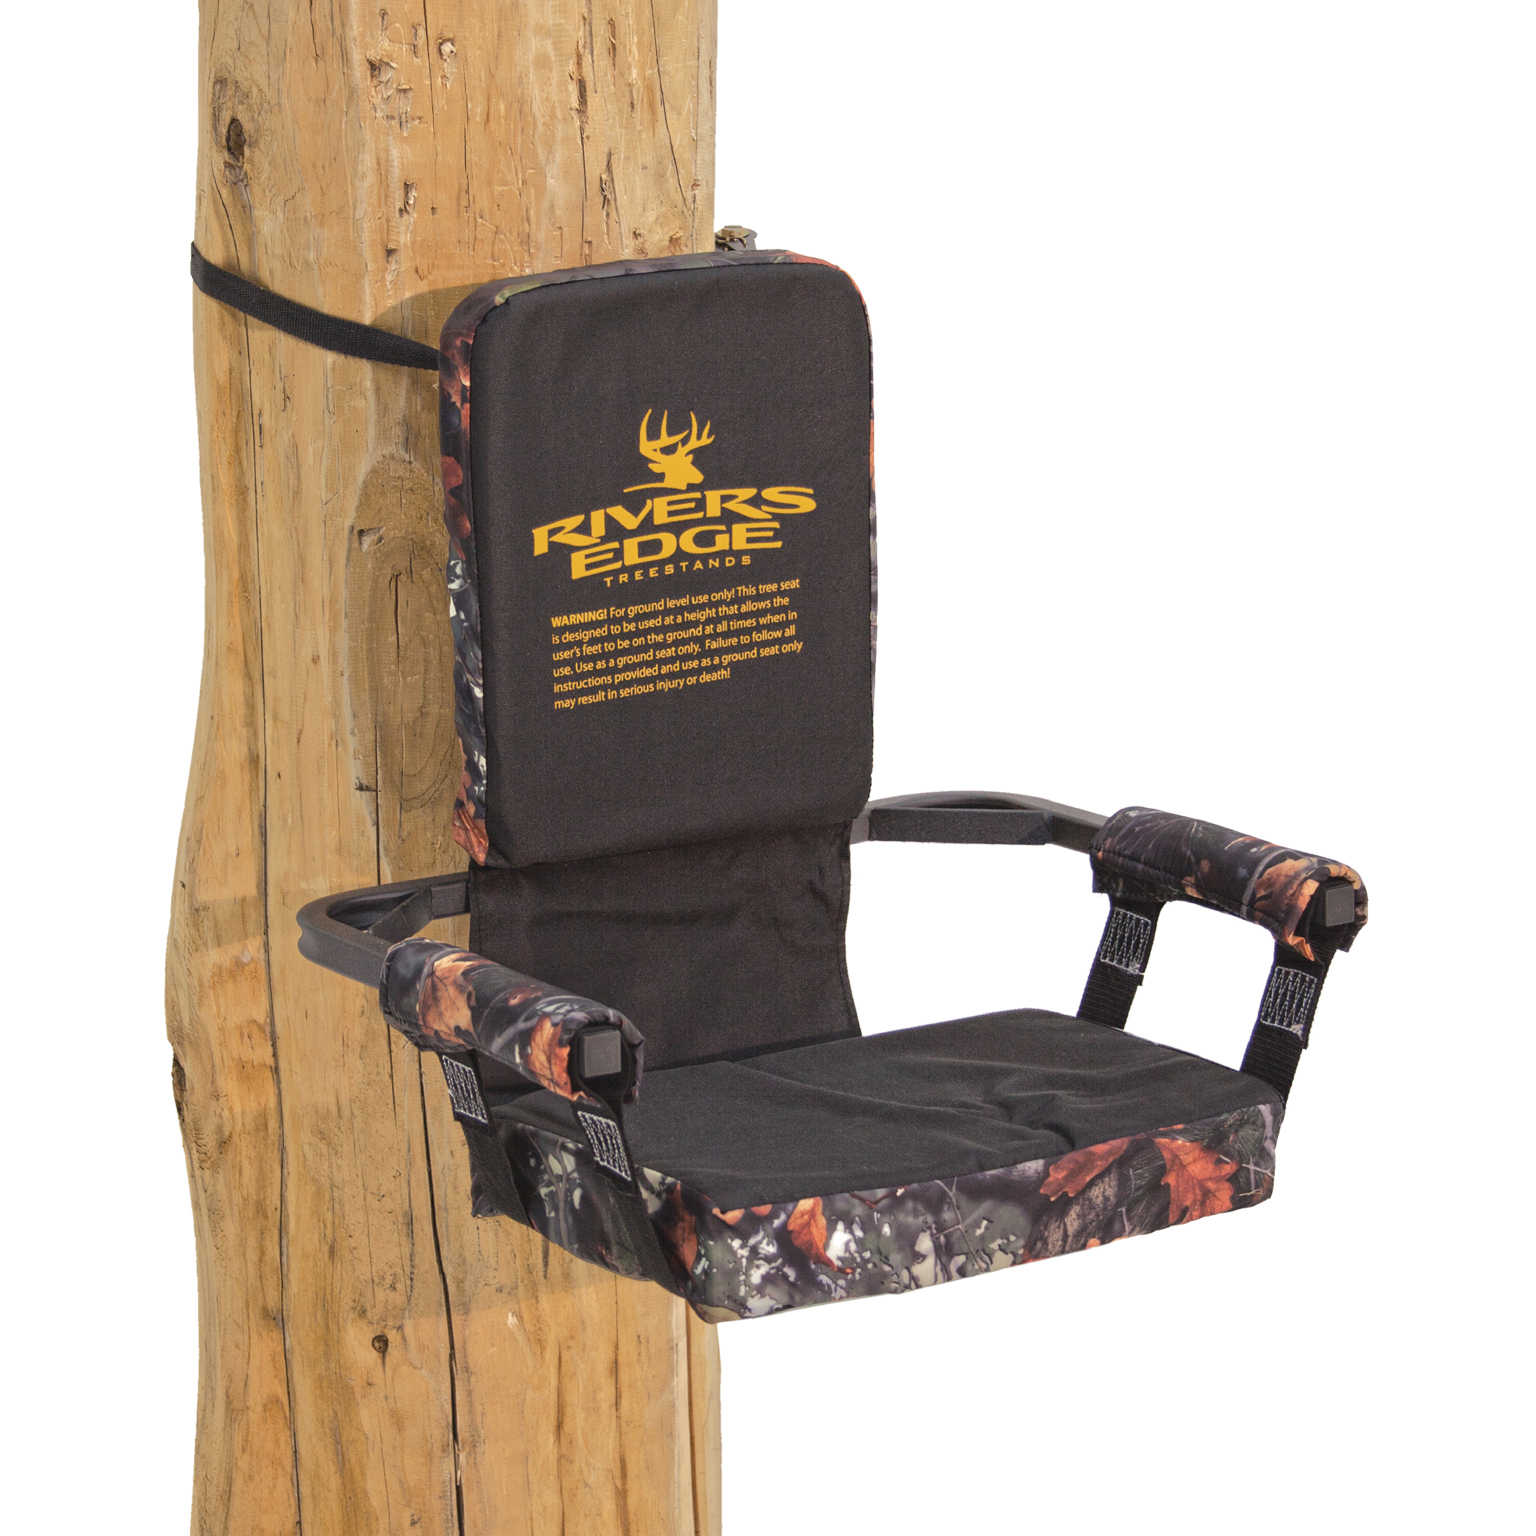 Rivers Edge RE761 Lounger Tree Seat for sale online 